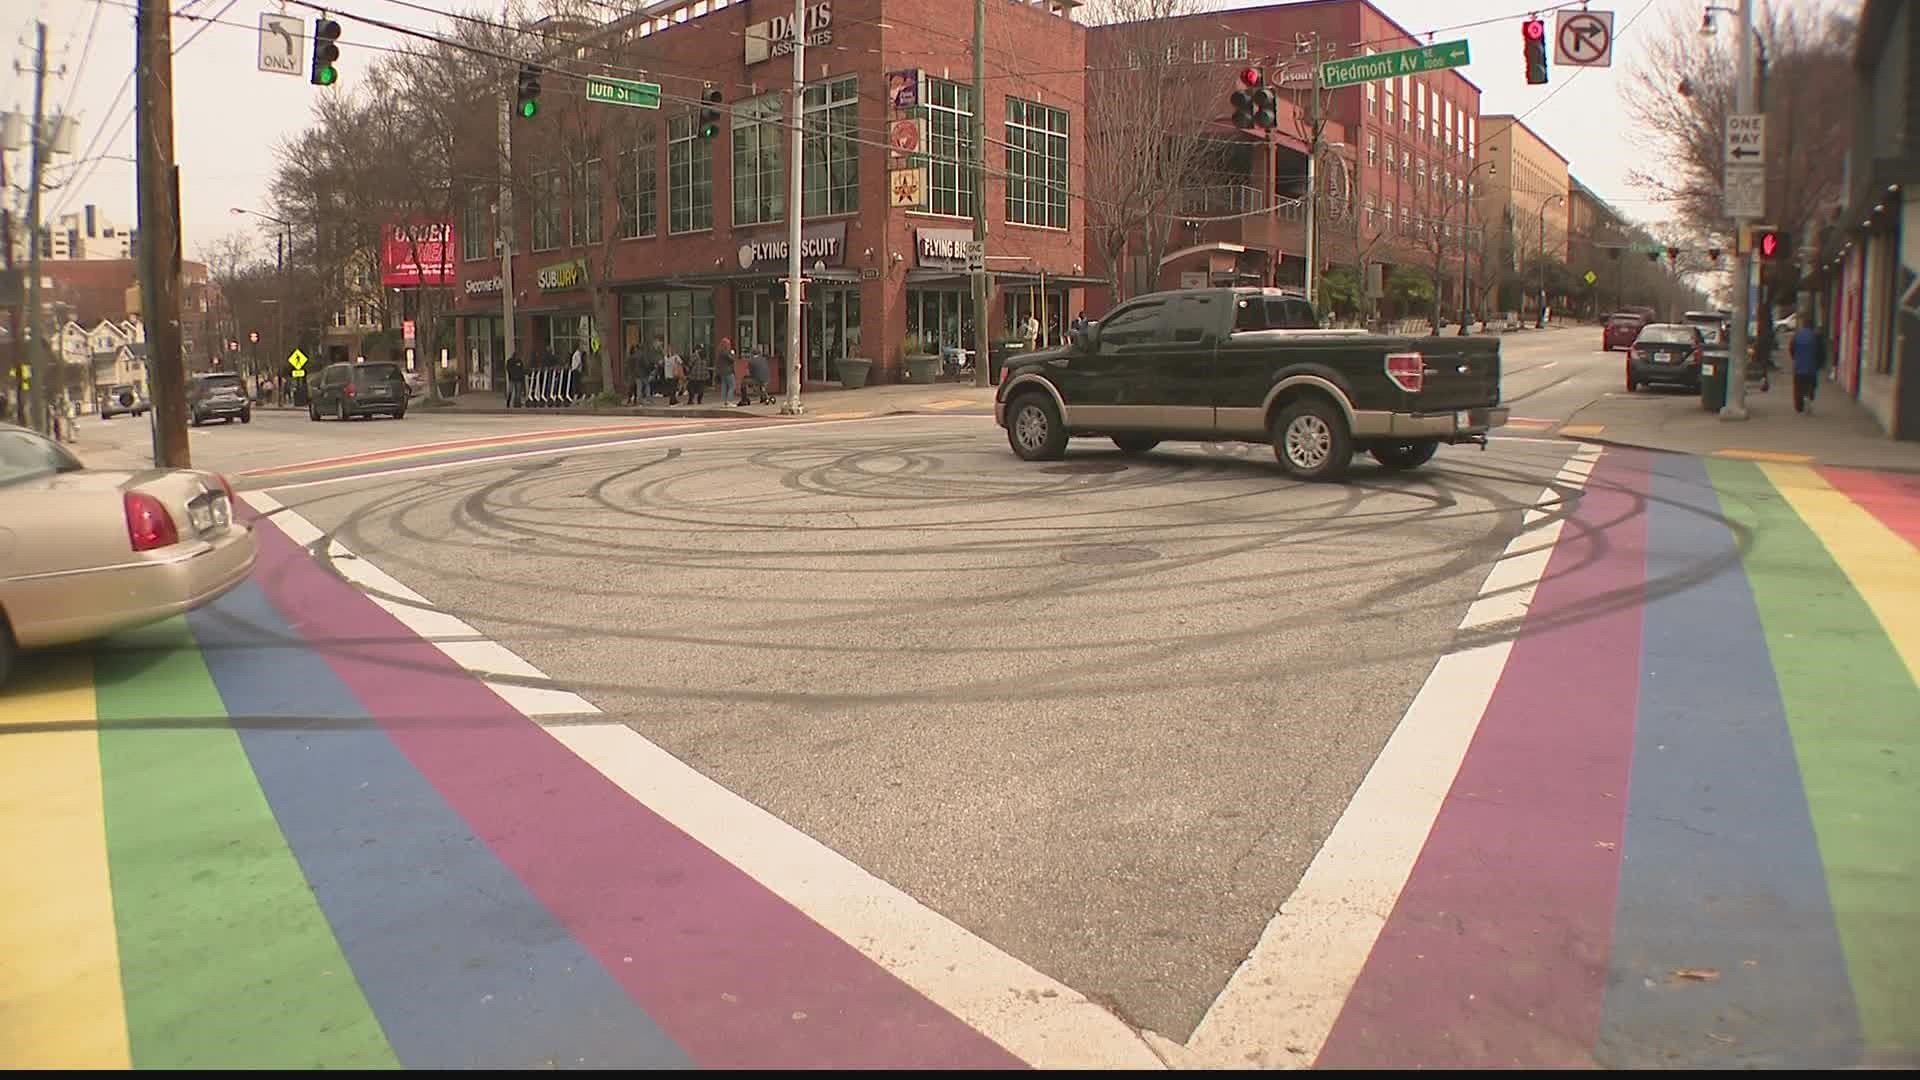 An Atlanta landmark in Midtown was marked up over the weekend, as drivers left skid marks all over the rainbow crosswalk at the intersection of 10th and Piedmont.